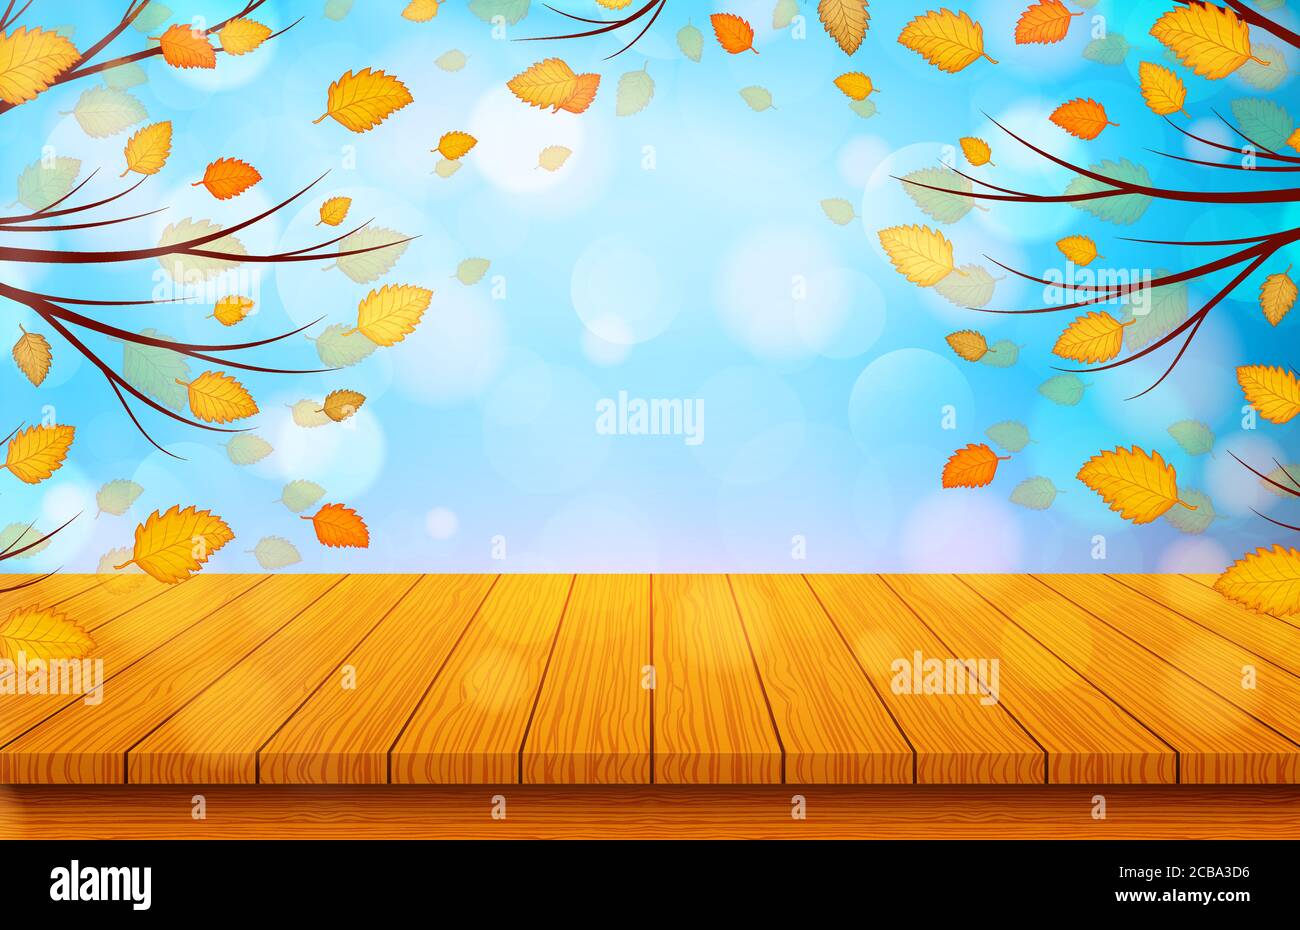 Wooden table with orange leaves. Autumn nature background. Vector illustration Stock Vector